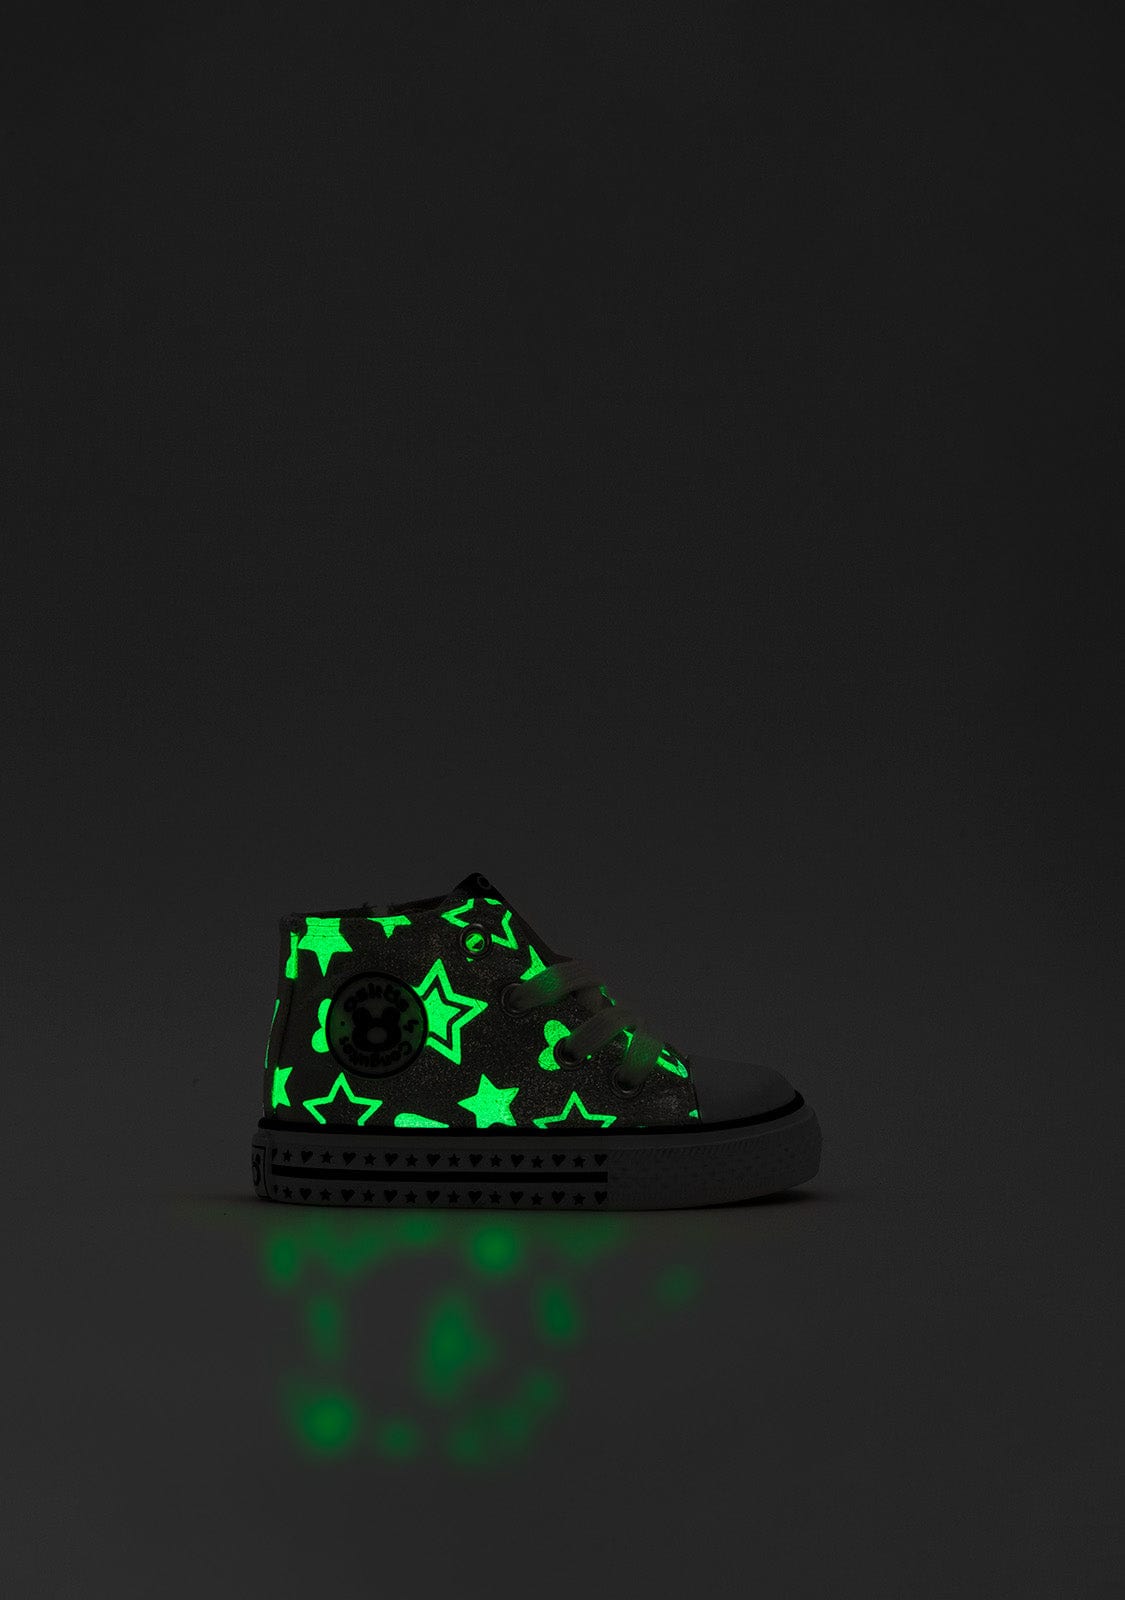 OSITO Shoes Baby's Silver Glows in the Dark High-Top Sneakers